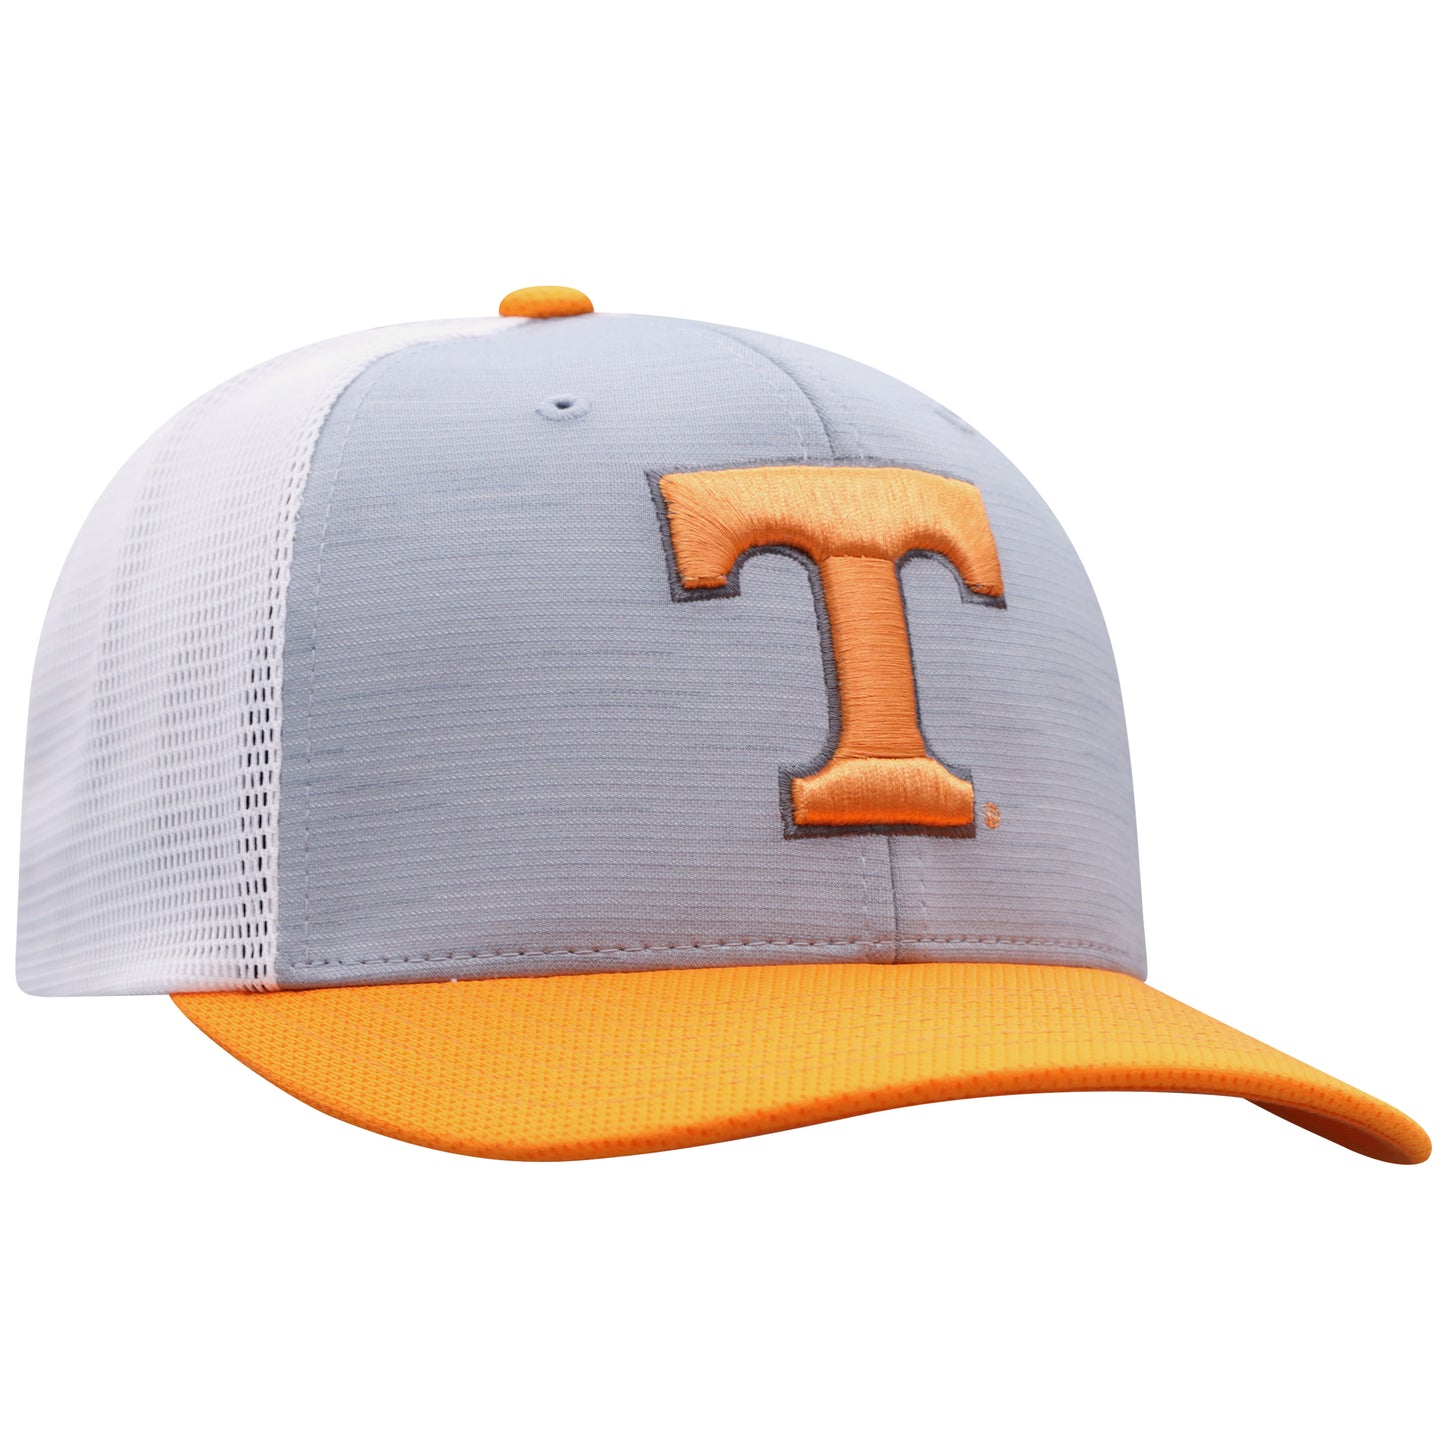 Men's Tennessee Volunteers Stamp 3-Tone Flex Fit Hat By Top Of the World